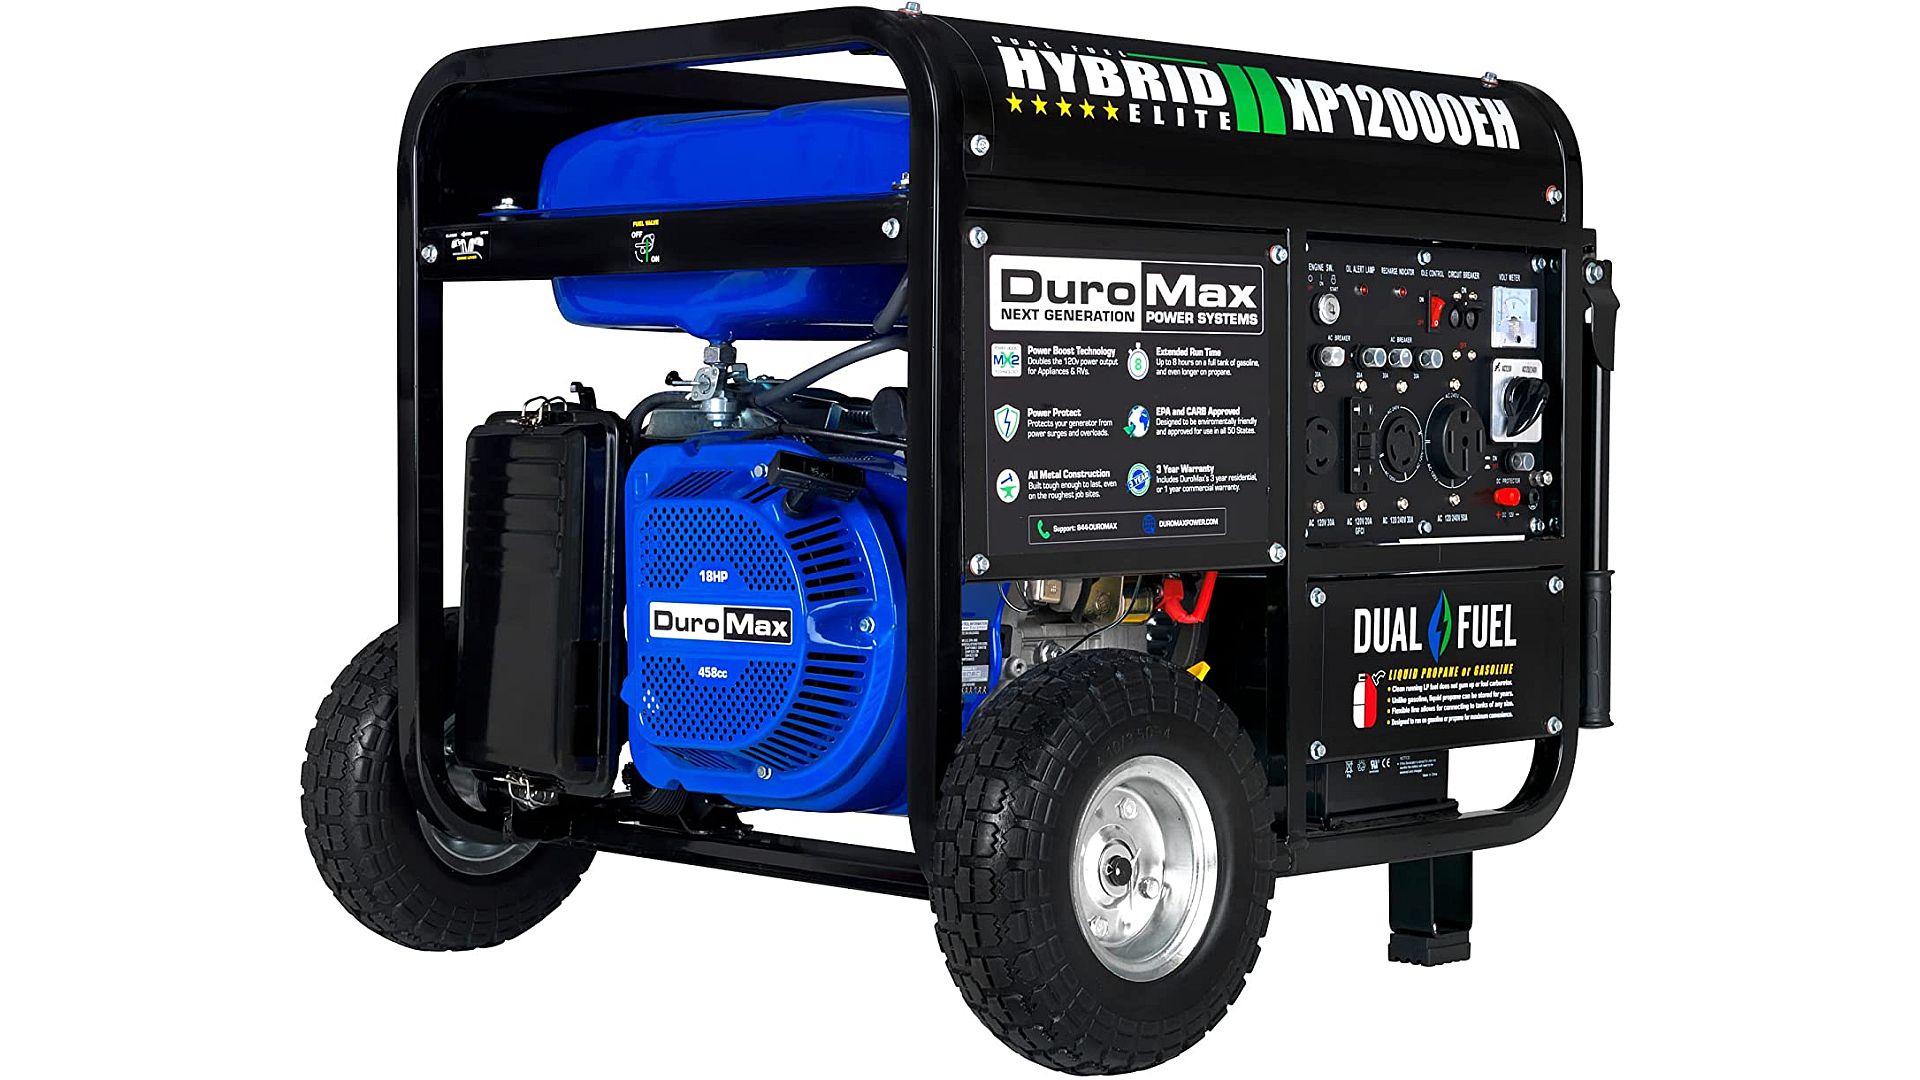 DuroMax XP12000EH Review: Dual Fuel Beast With Flat Wheels